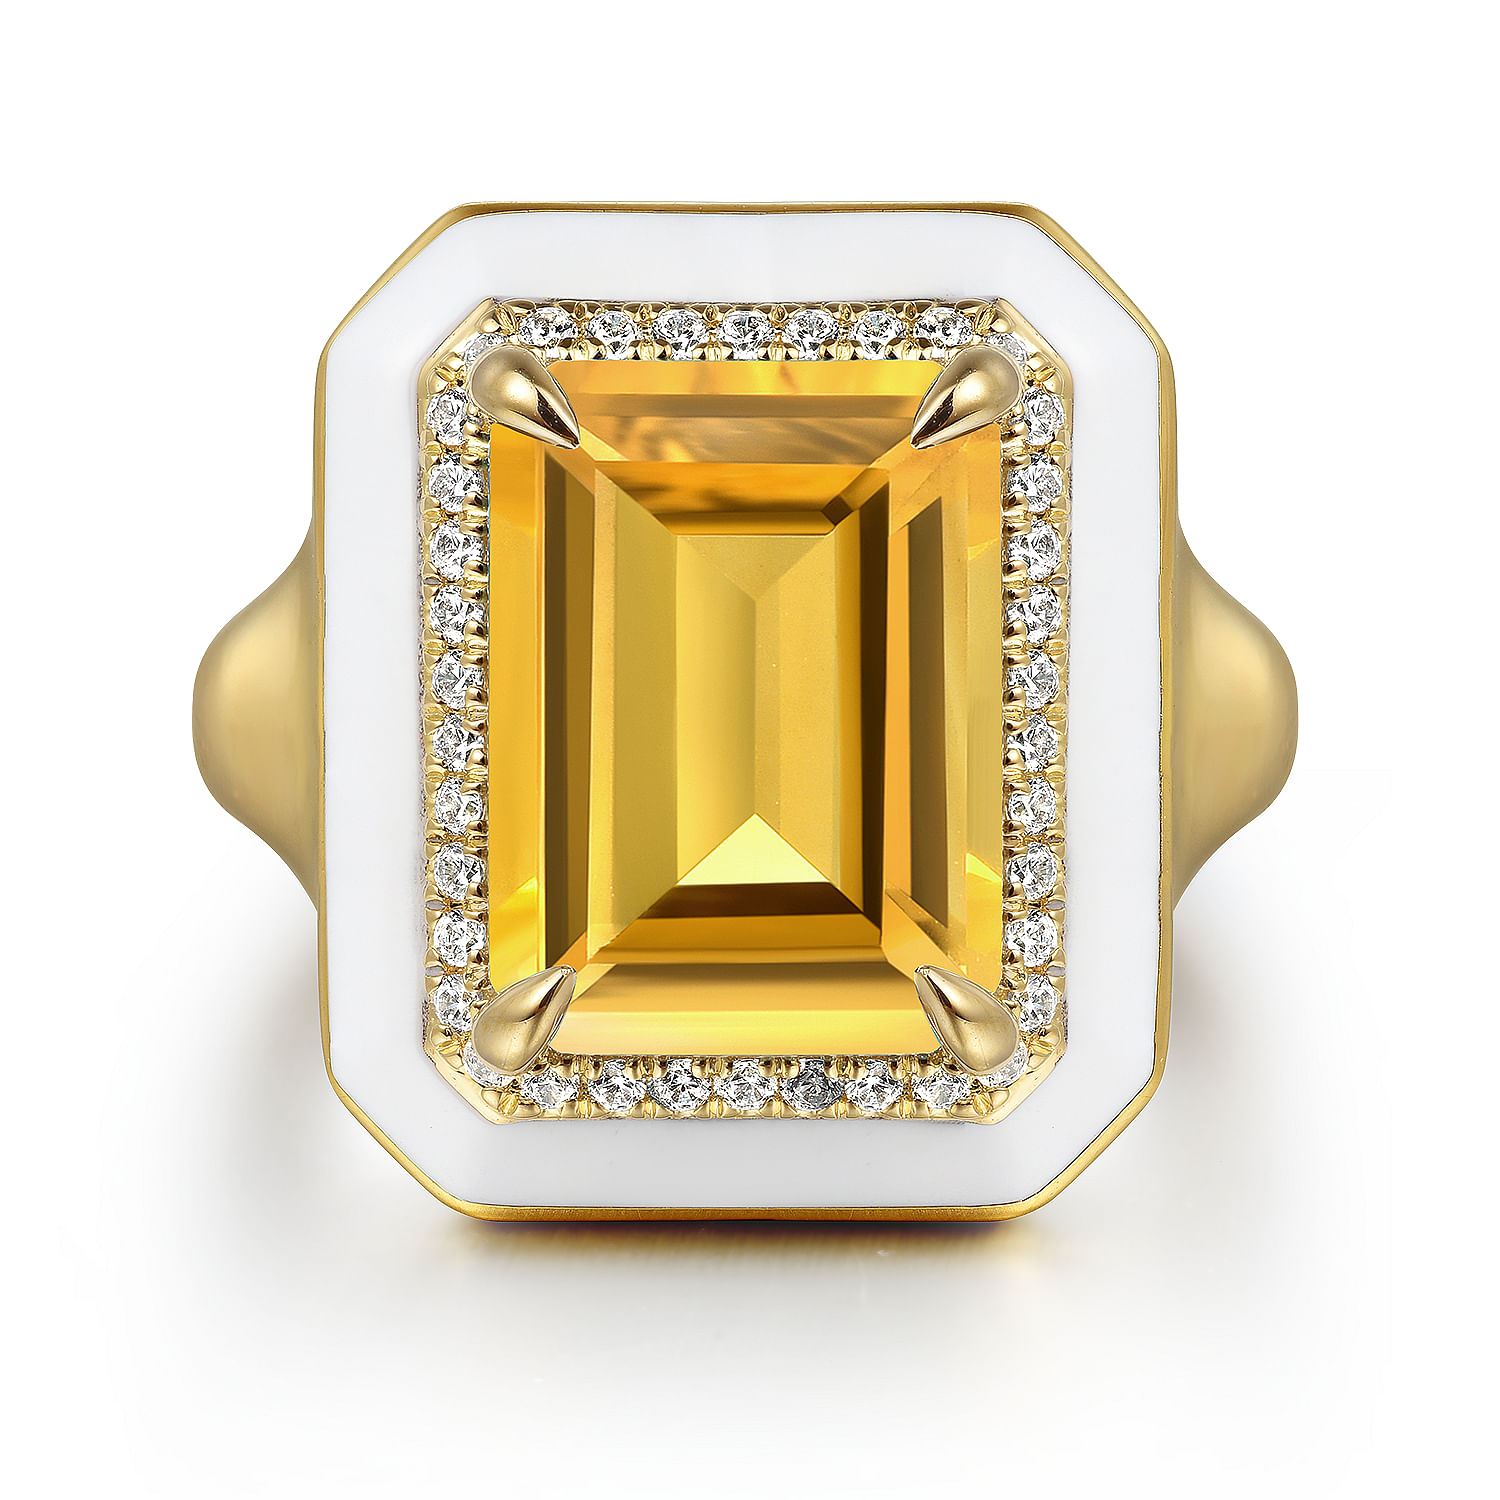 Gabriel - 14K Yellow Gold Diamond and Citrine Emerald Cut Ladies Ring With Flower Pattern J-Back and White Enamel